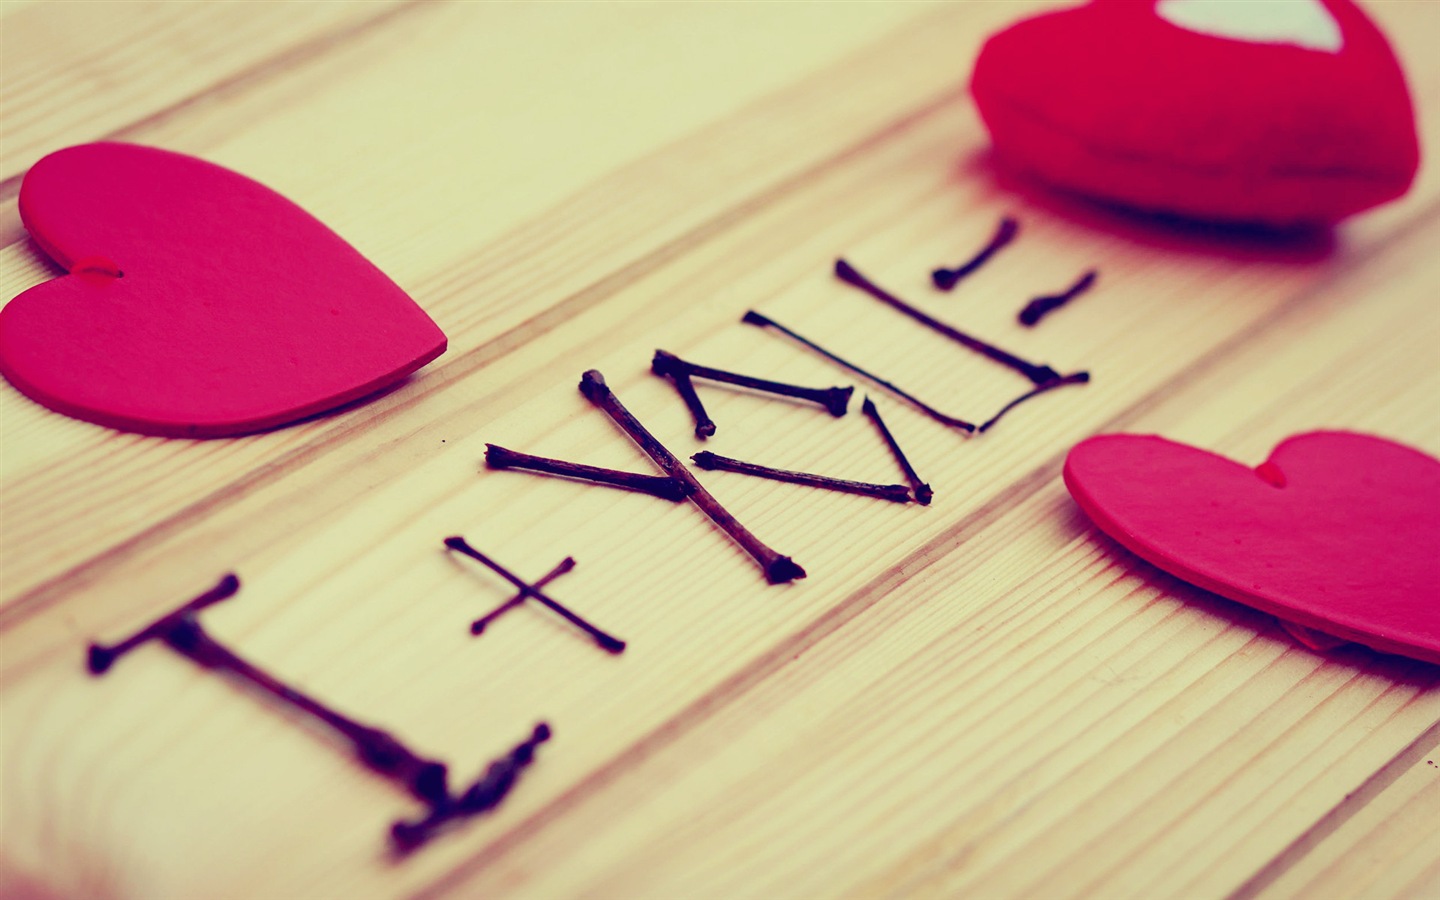 The theme of love, creative heart-shaped HD wallpapers #4 - 1440x900